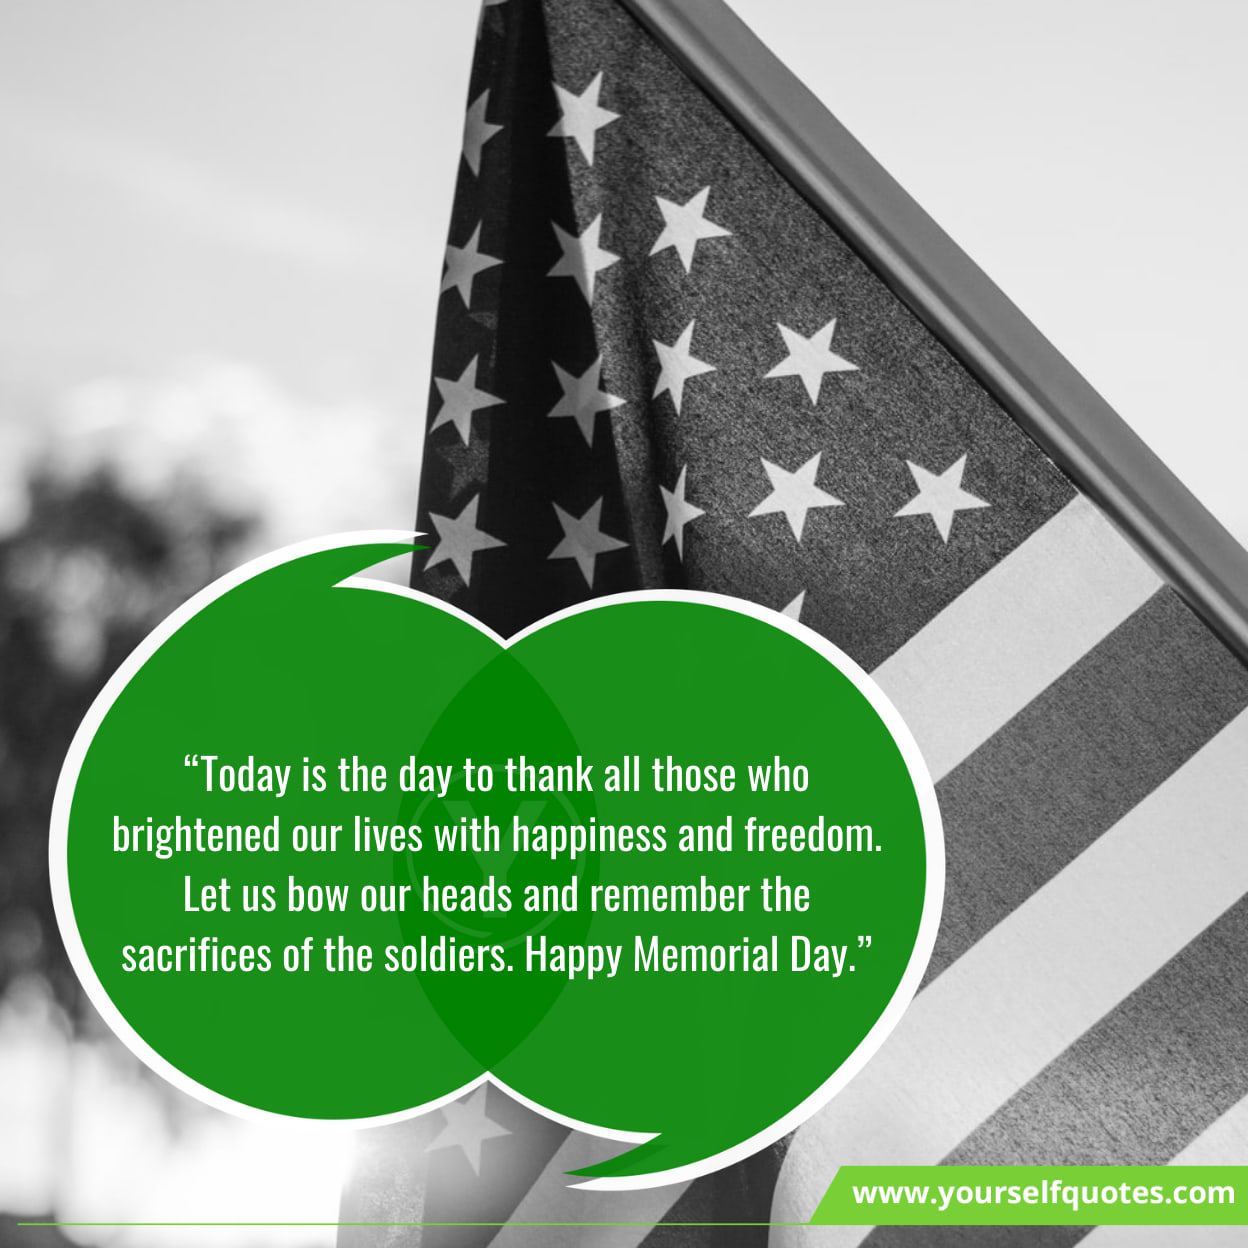 Memorial Day Messages & Sayings